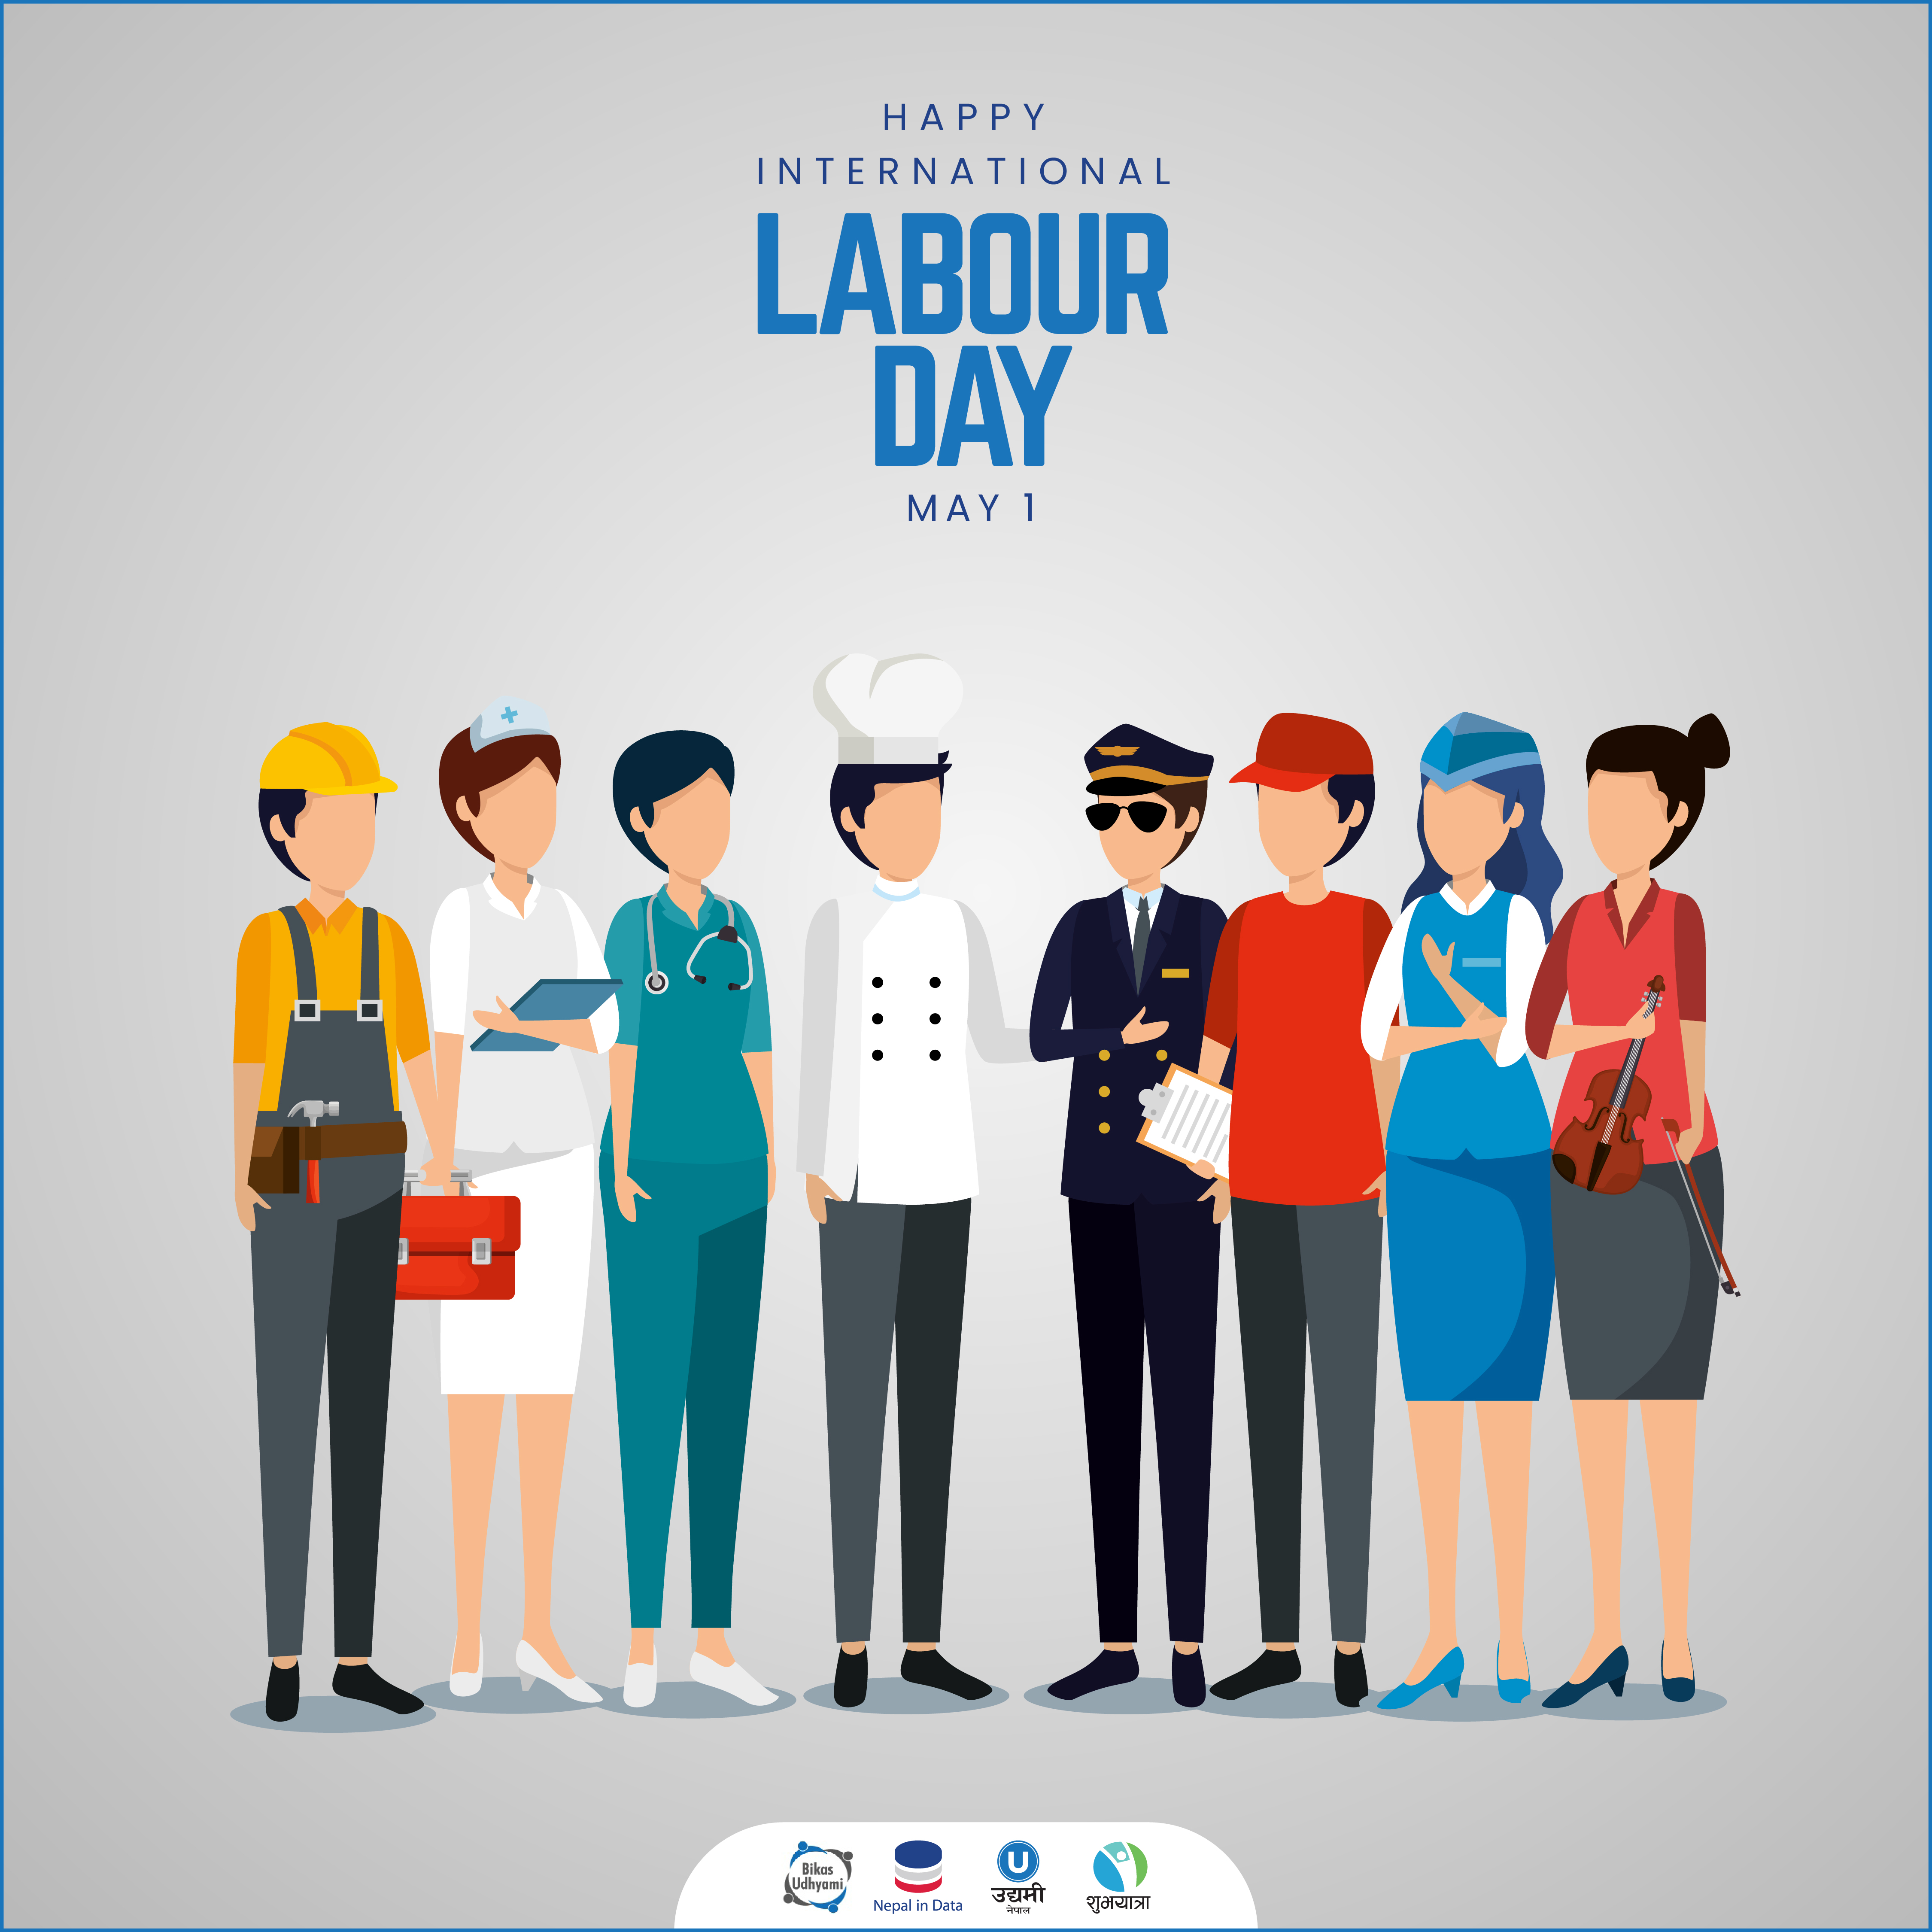 HAPPY INTERNATIONAL LABOUR DAY 2020 Infograph